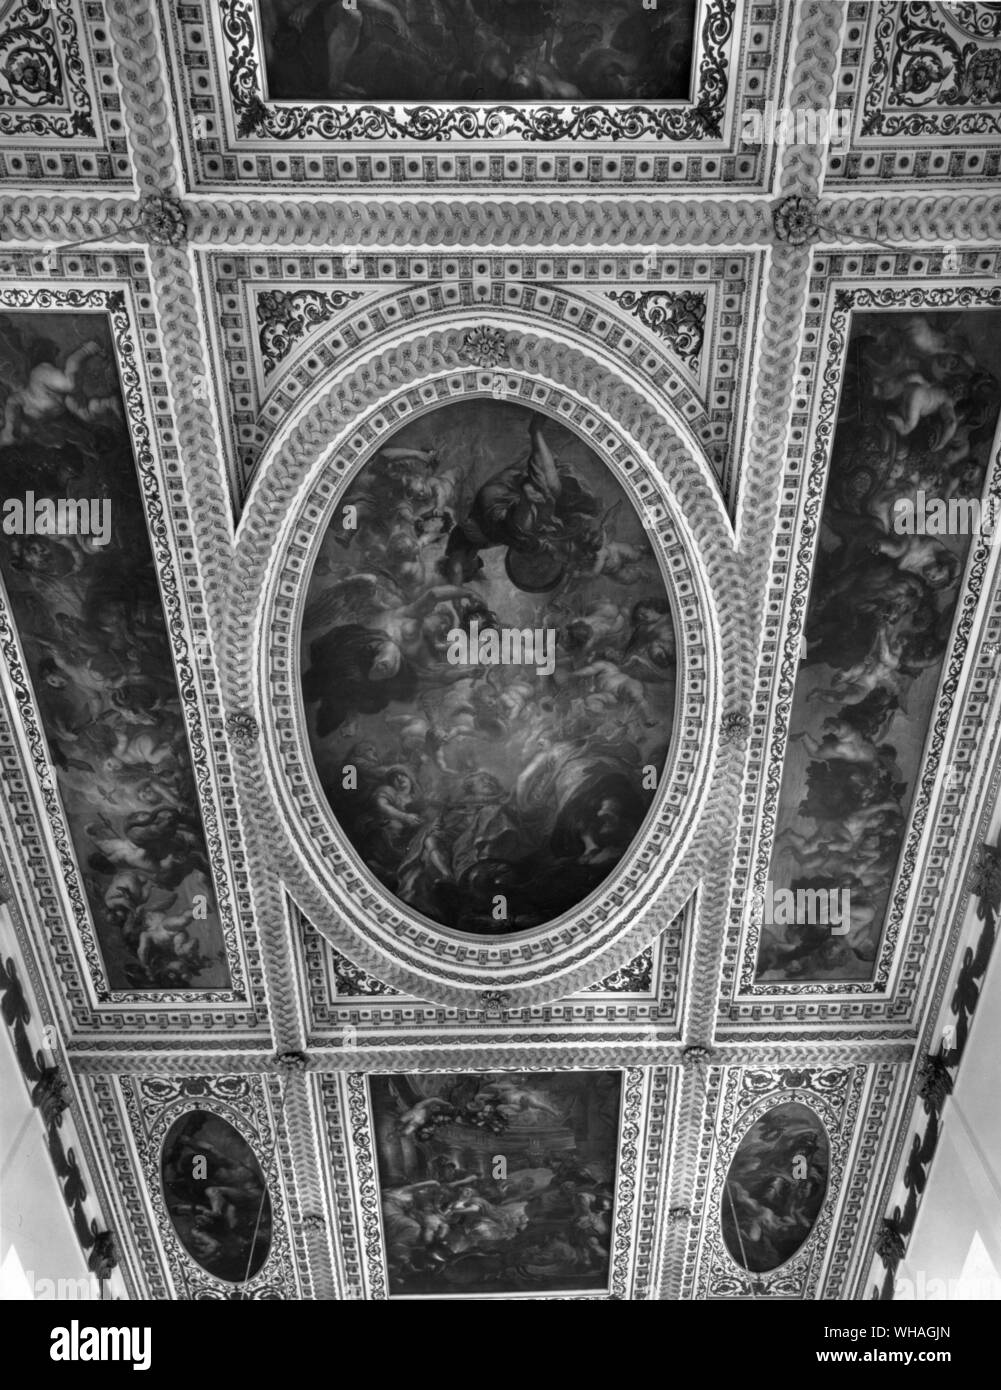 The ceiling of the Banqueting House. Whitehall Stock Photo